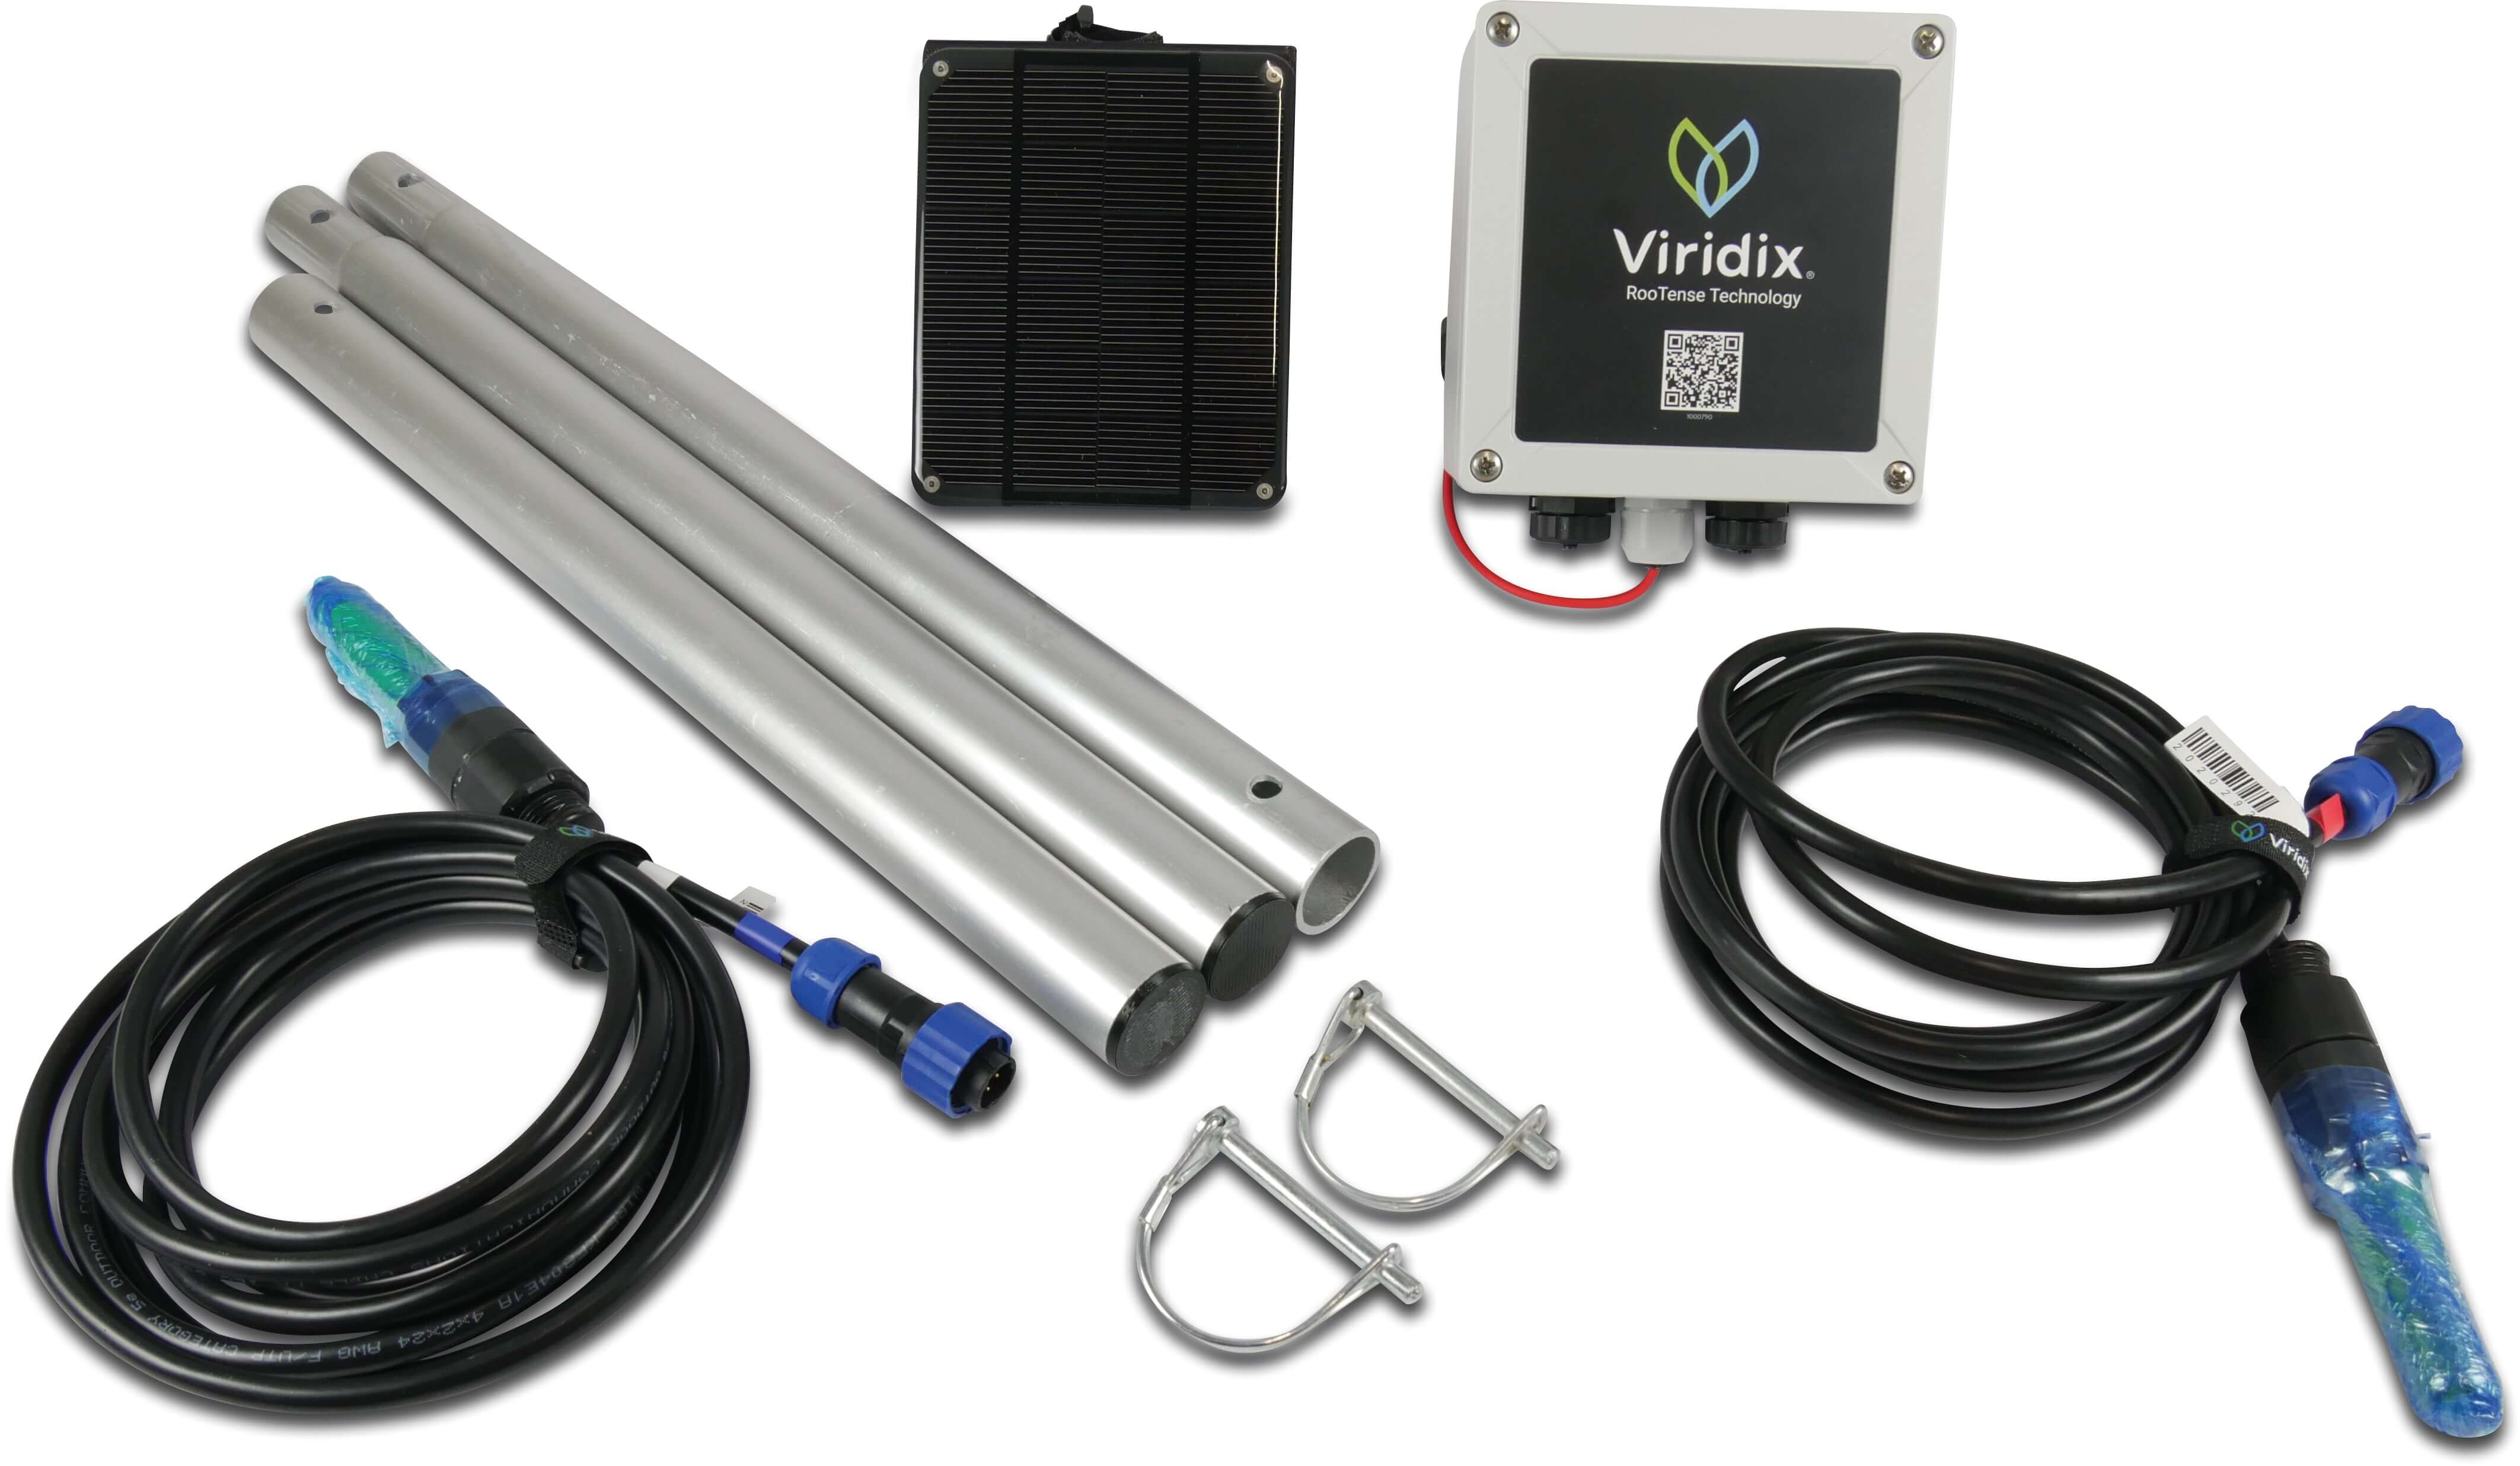 Viridix Gen3 system, including lot device, 2 Rootsense sensors, installation kit and 1-year subscription type Rootense 2 sensorer